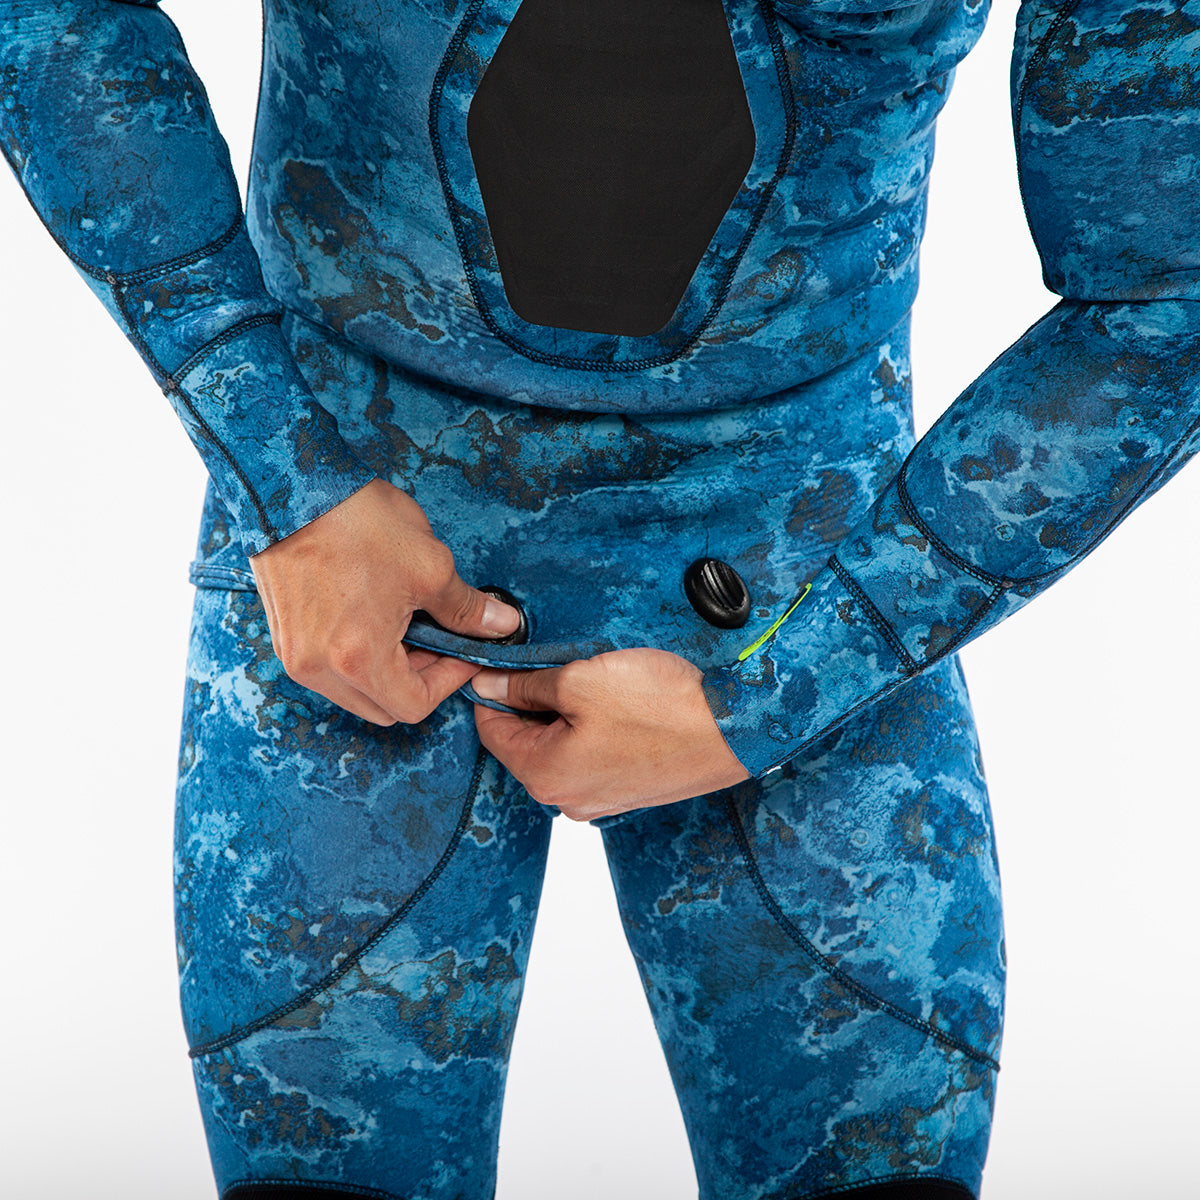 clip function for the camouflage wetsuit